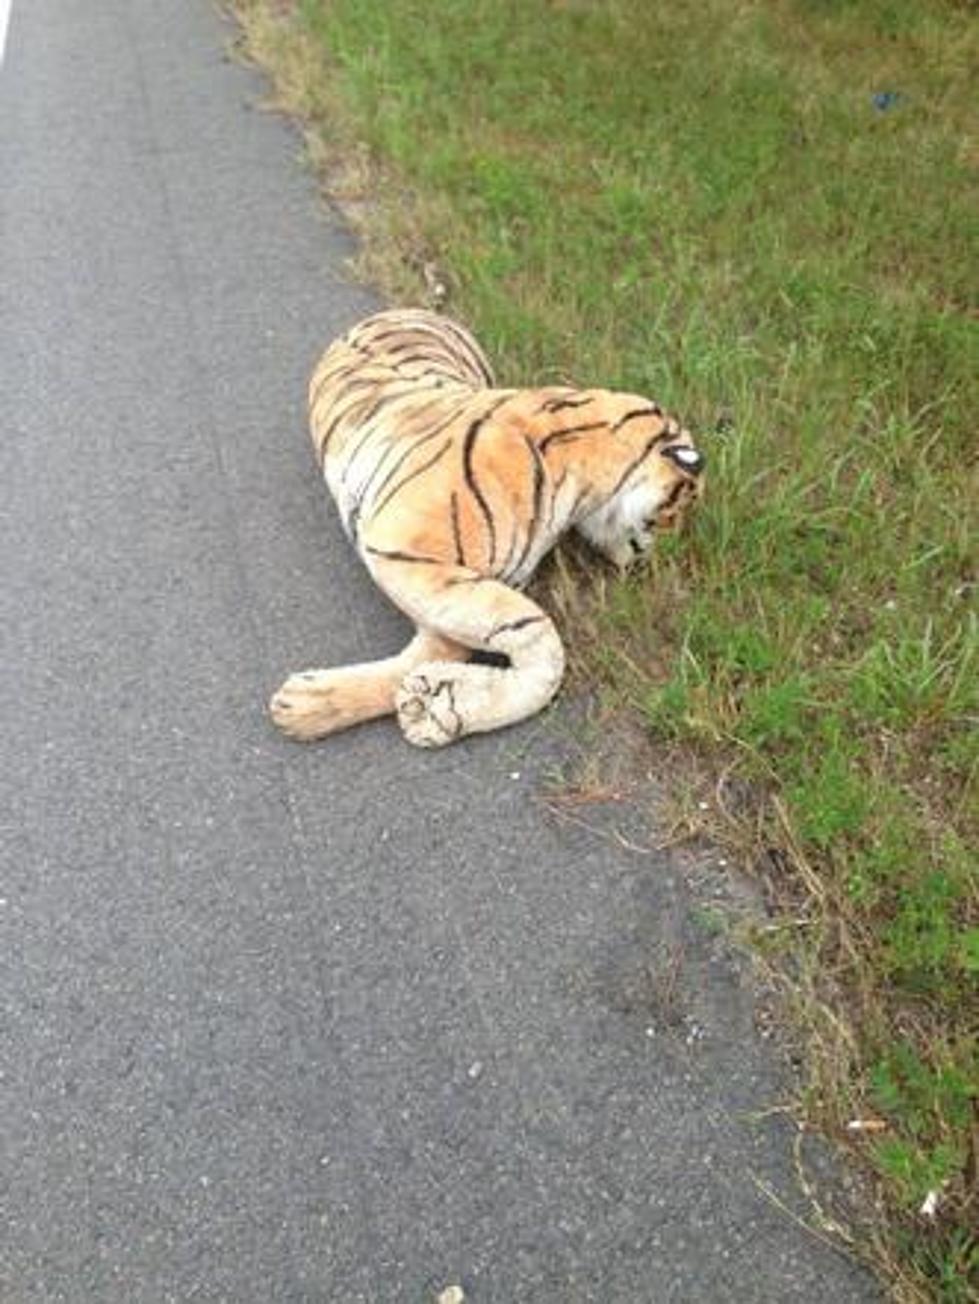 Arkansas Police Pick Up ‘Dead’ Tiger in the Middle of the Road